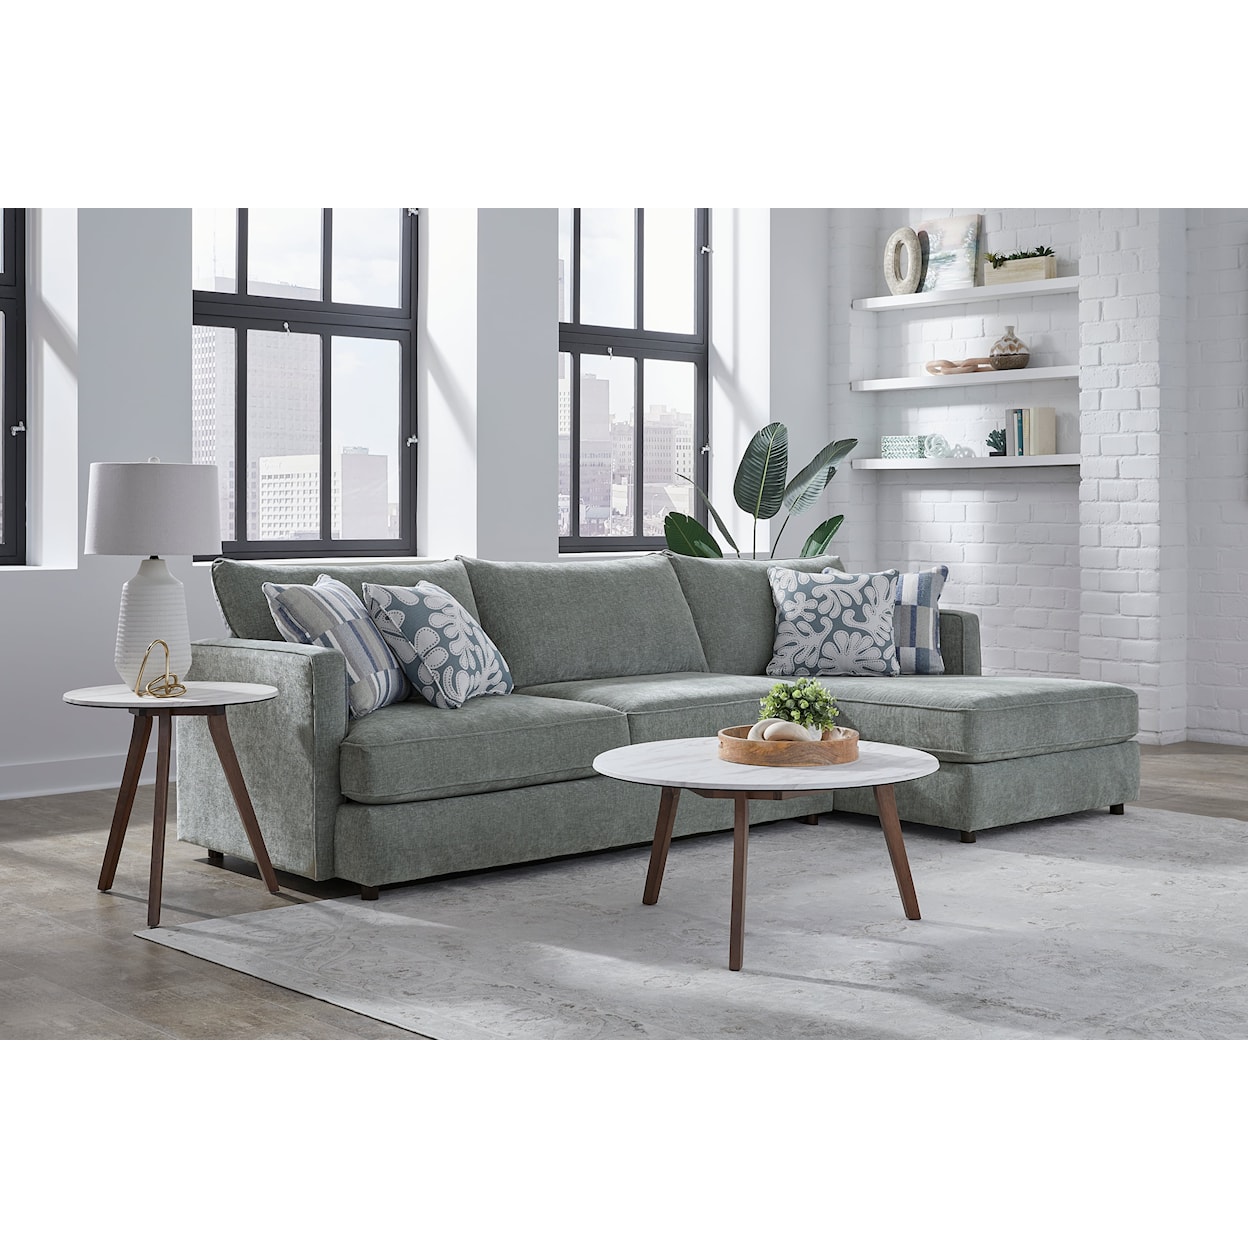 The Mix Finley Chaise Sofa